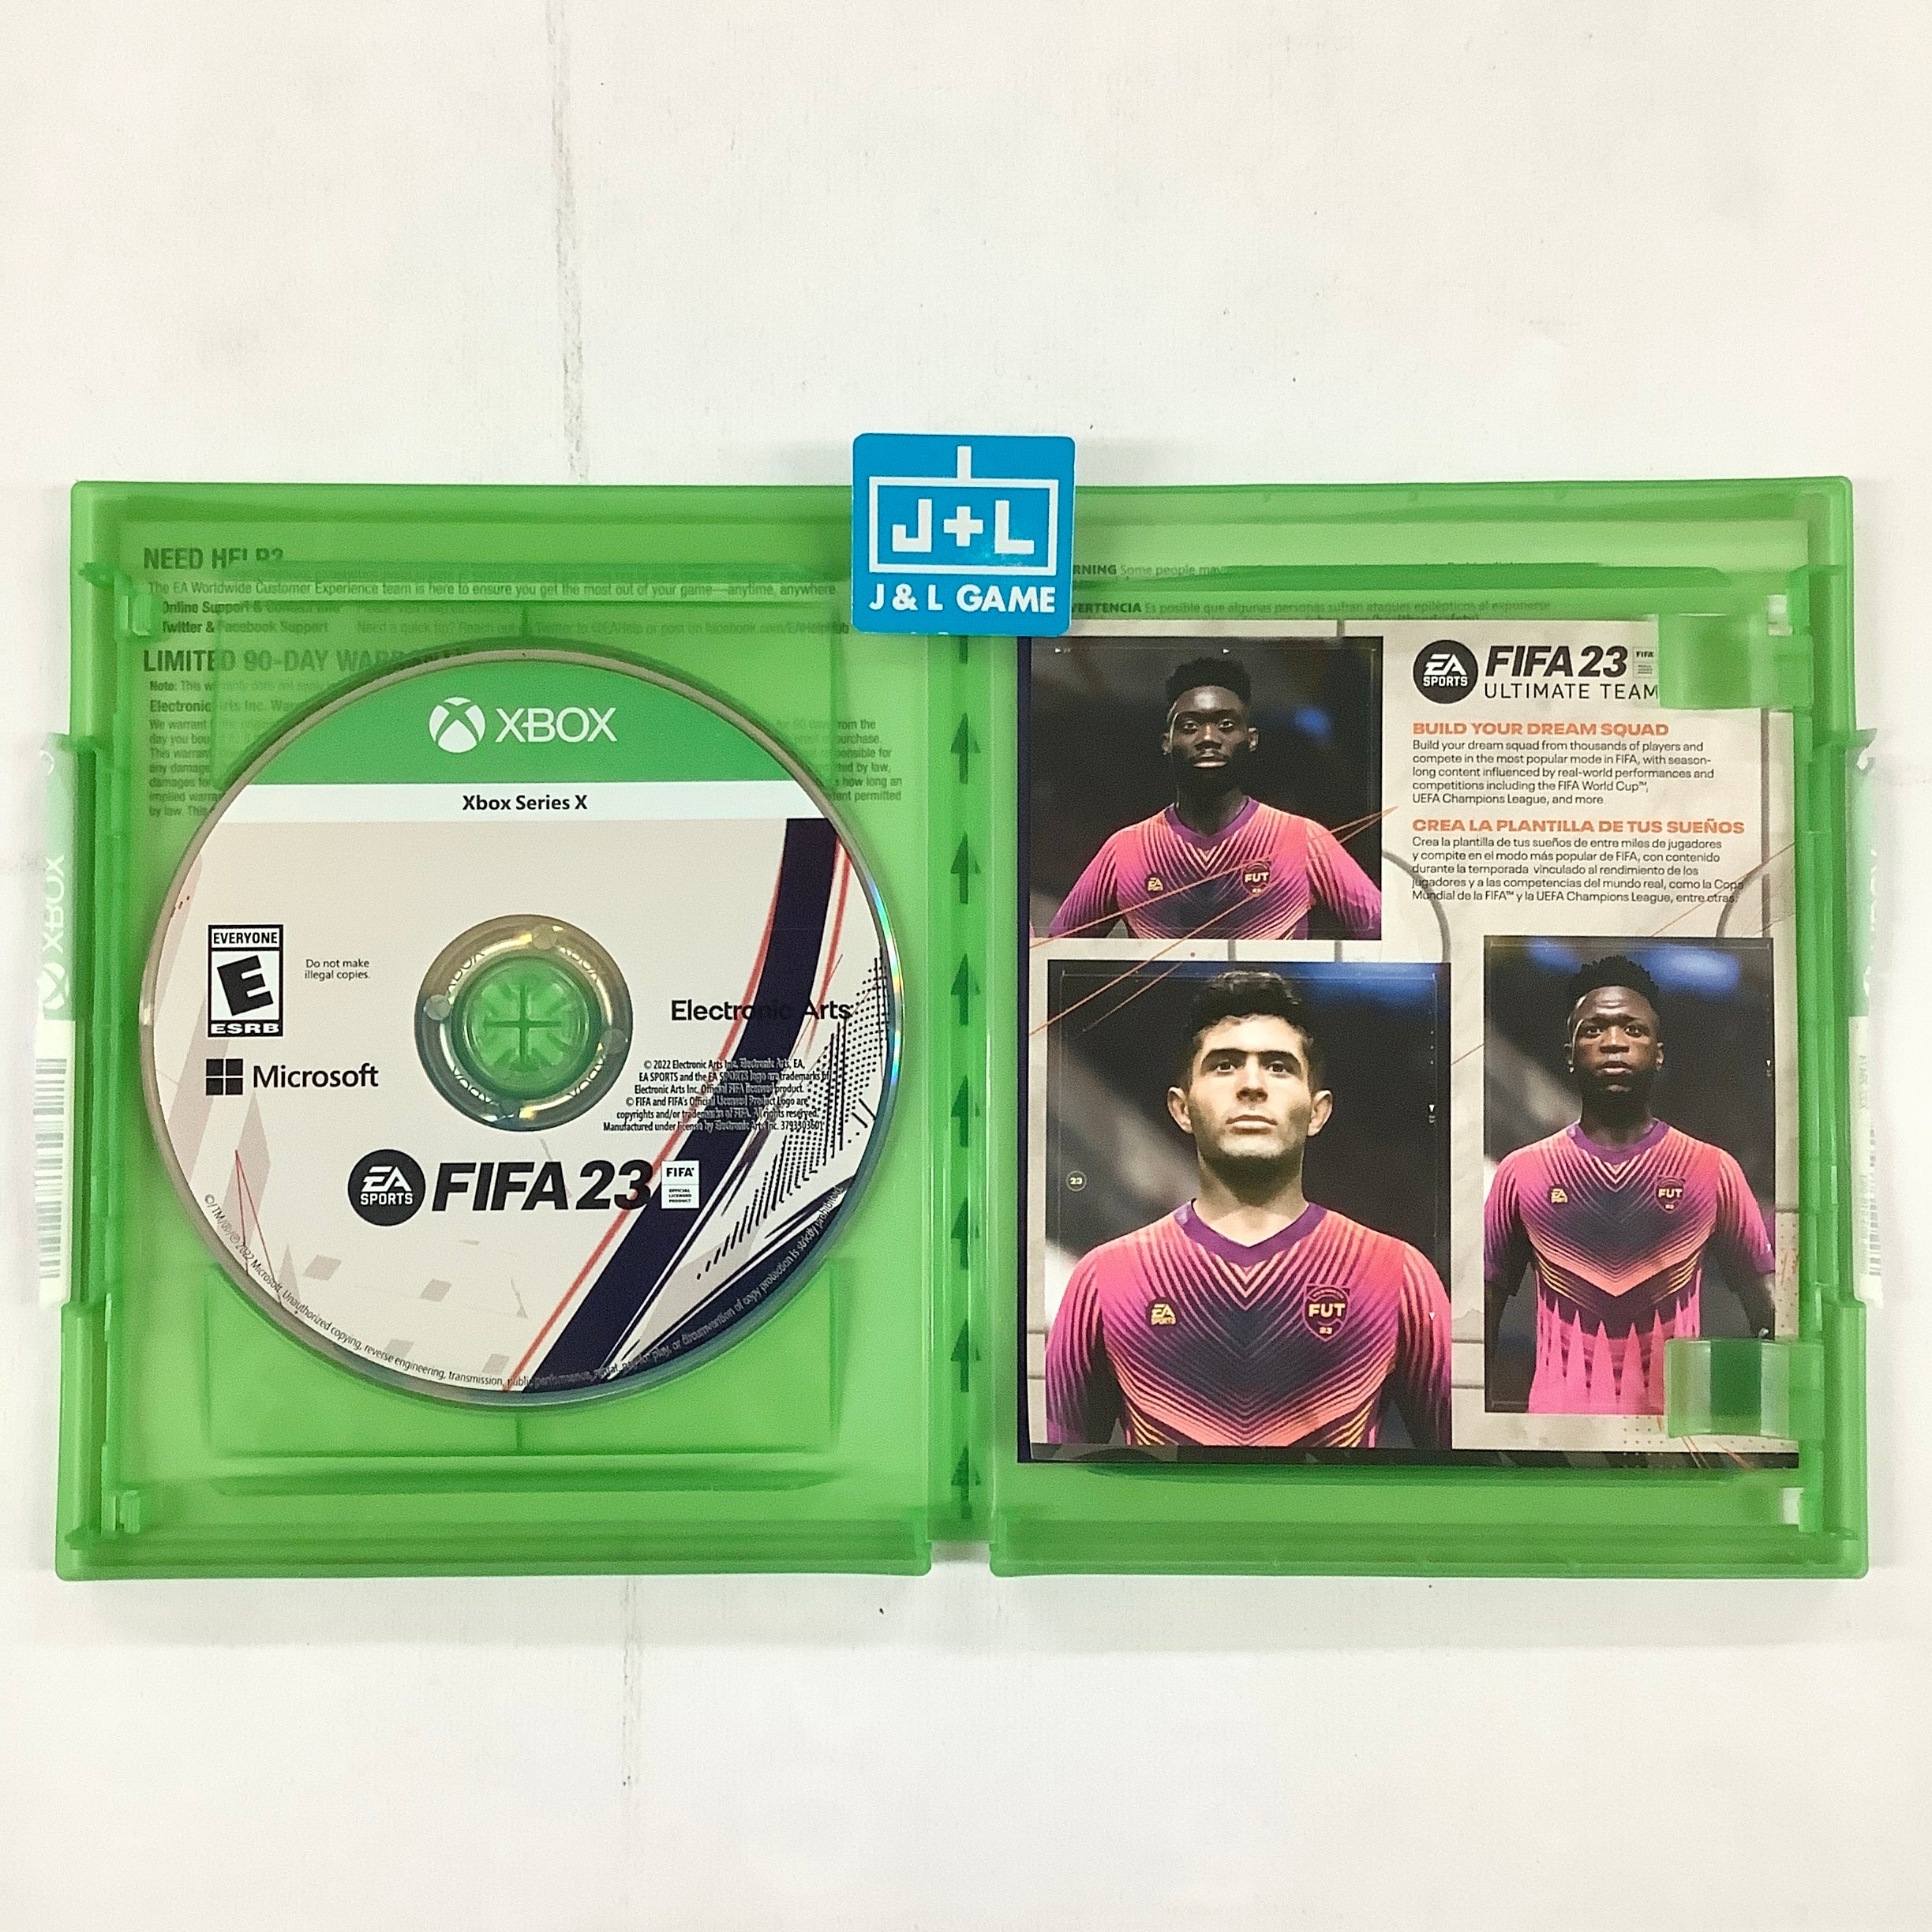 FIFA 23 - (XSX) Xbox Series X [UNBOXING] Video Games Electronic Arts   